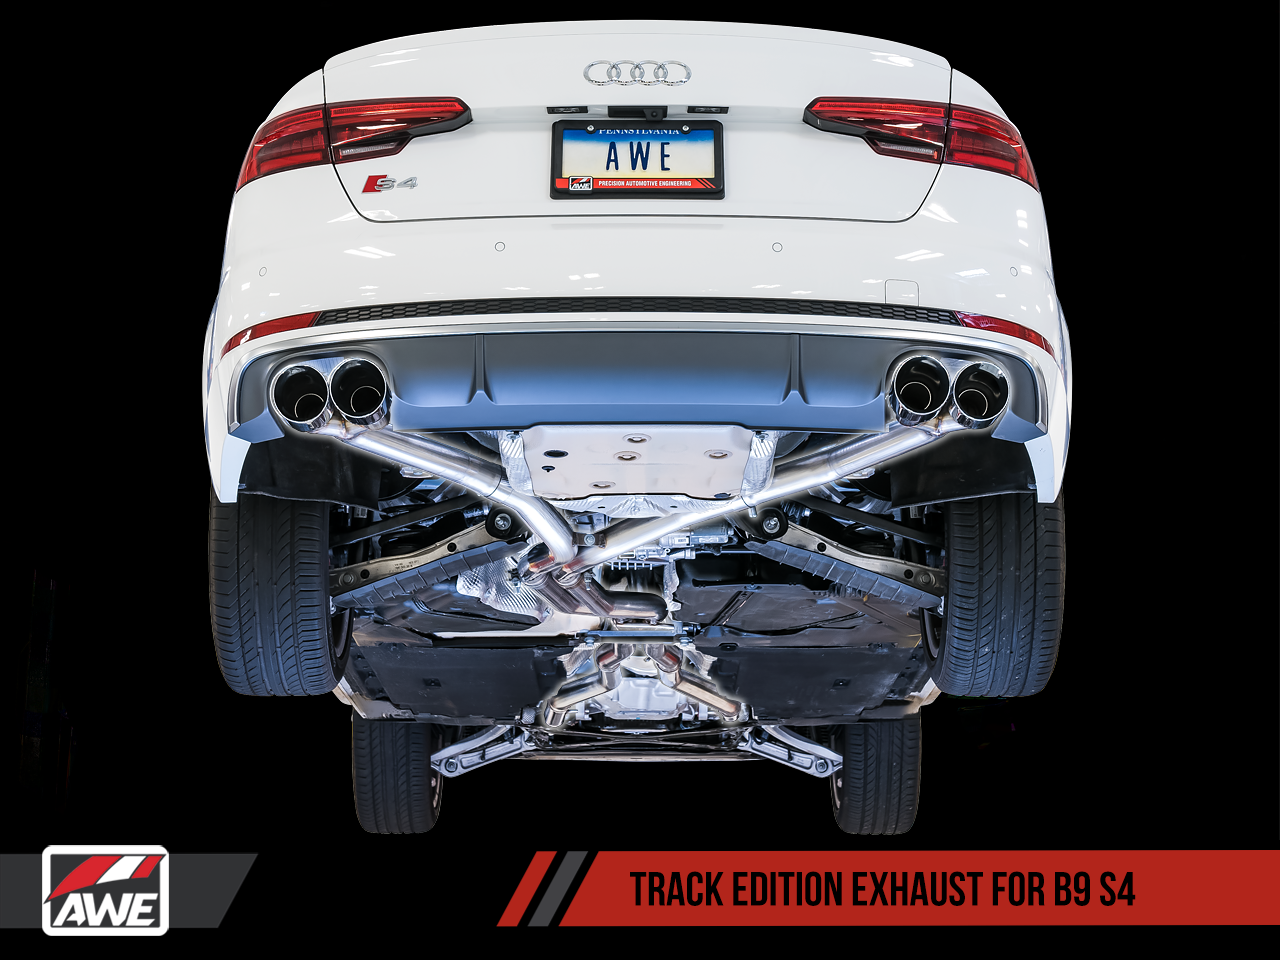 AWE Track Edition Exhaust for B9 S4 - Resonated for Performance Catalyst - Motorsports LA